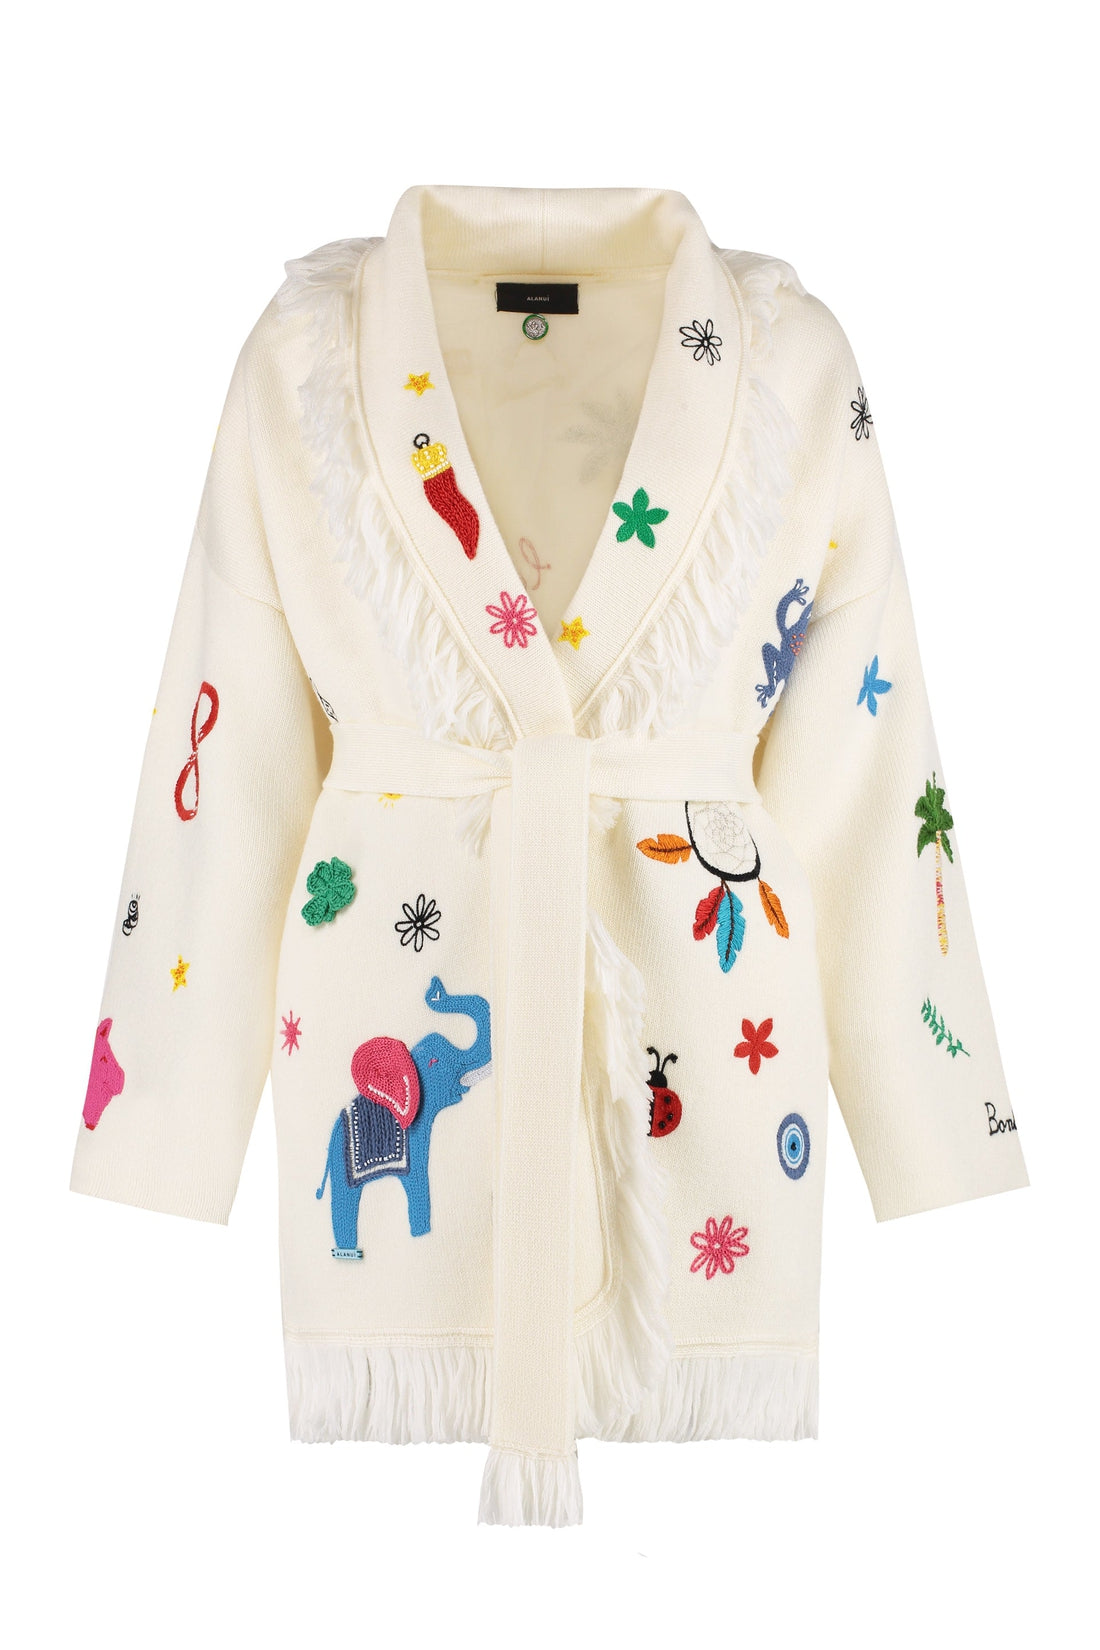 Alanui-OUTLET-SALE-Lucky Charm embroidered cardigan-ARCHIVIST